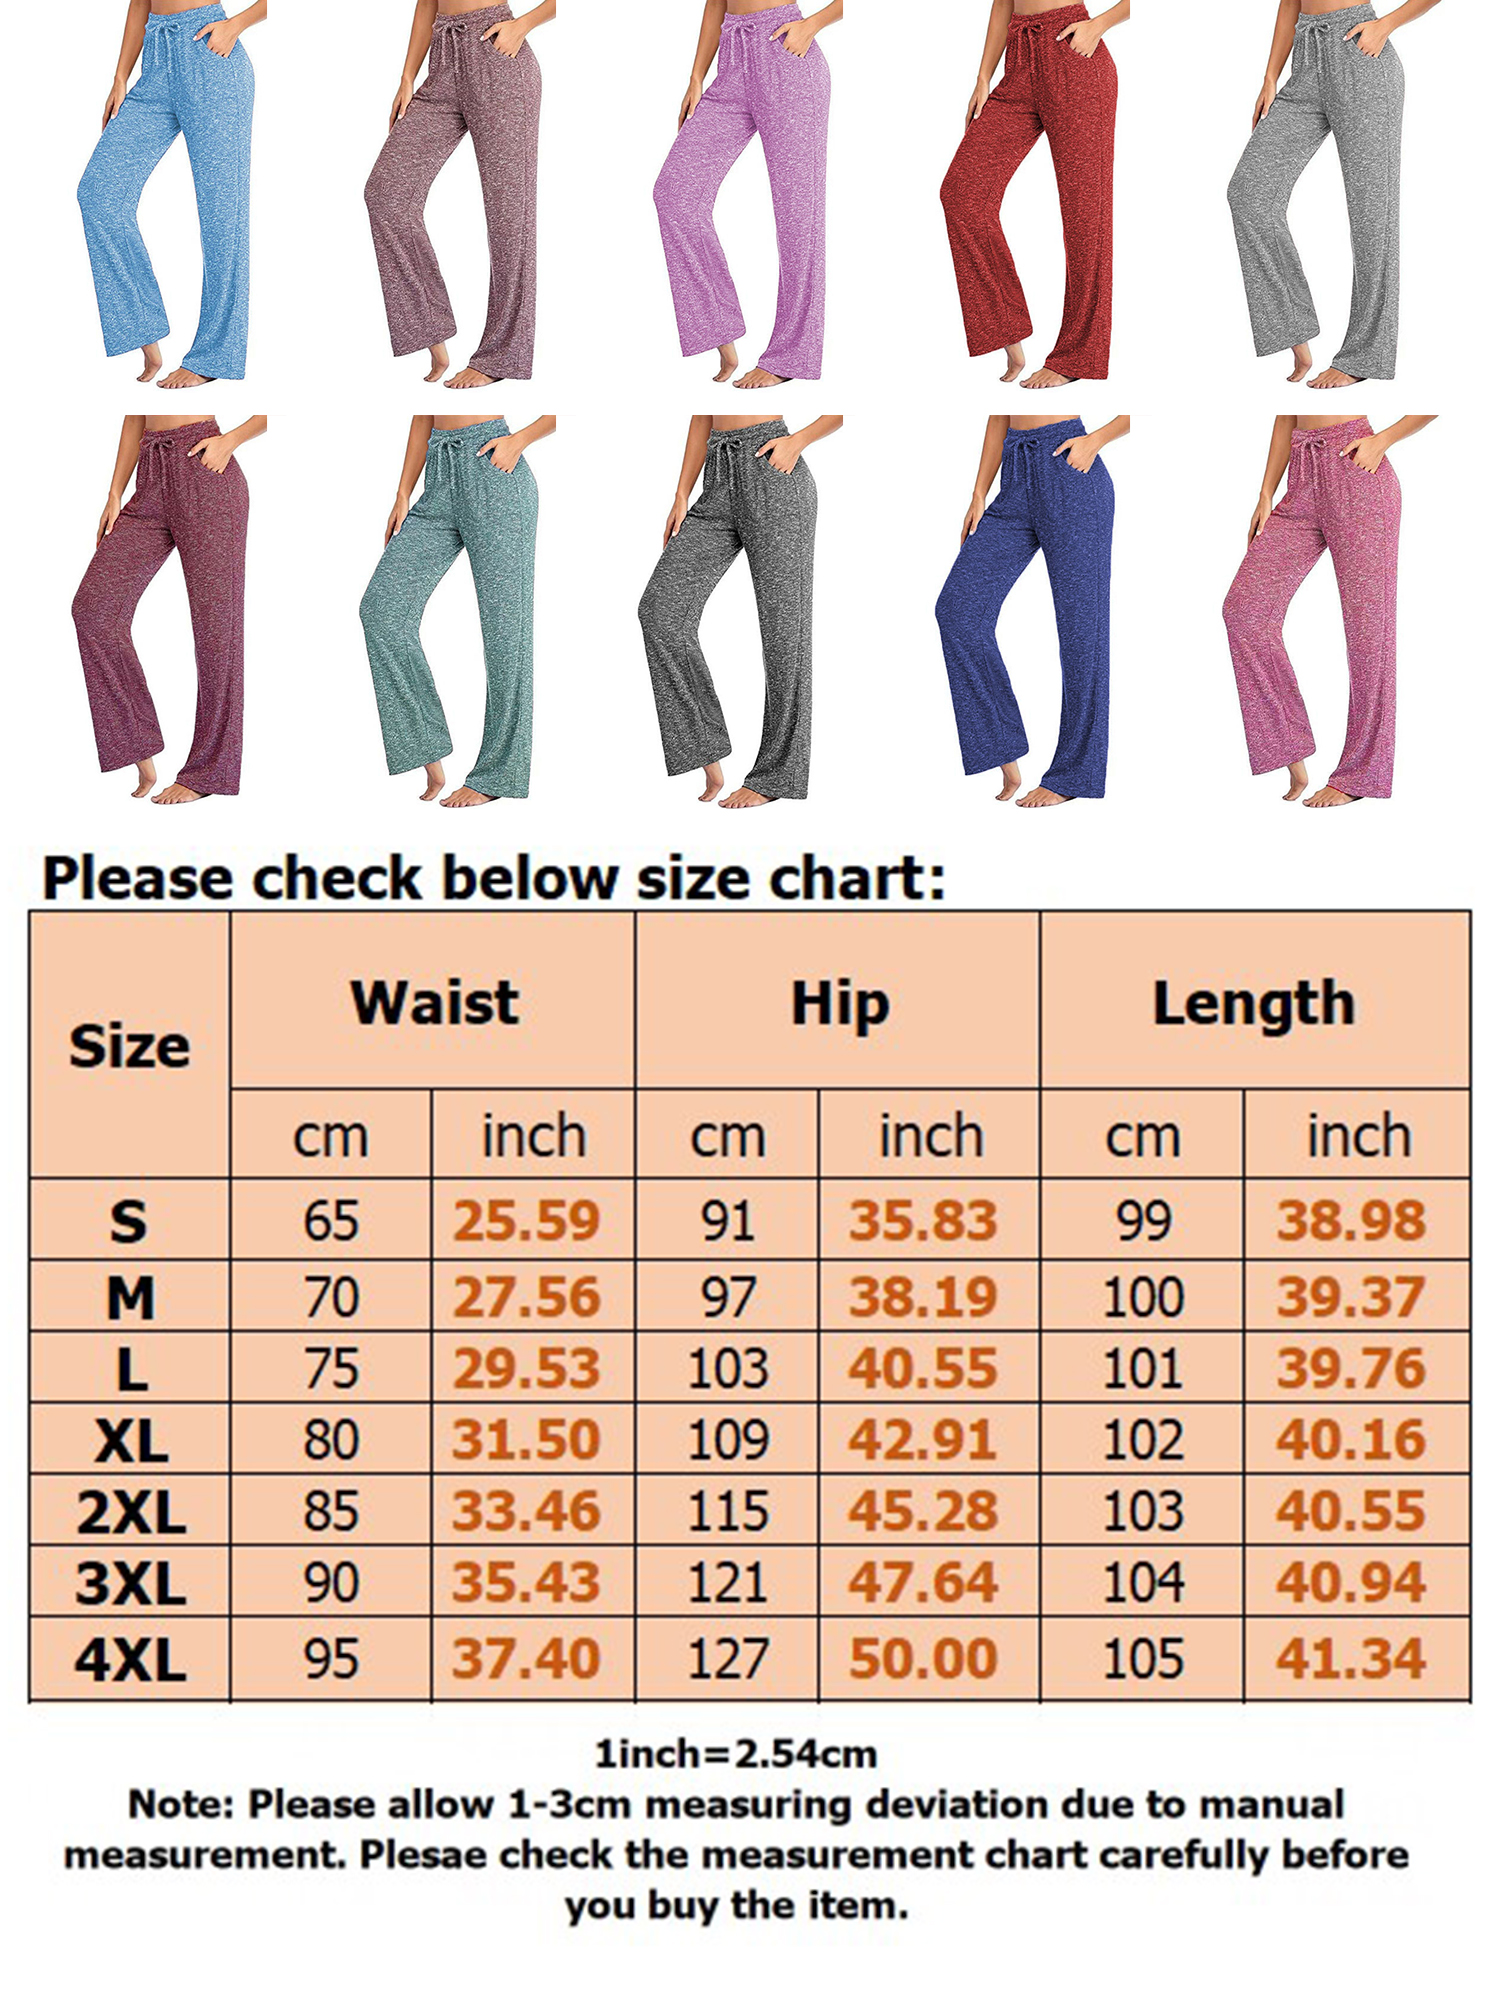 Sexy Dance Women Yoga Pants High Waisted Casual Sweatpant Elastic Waist Wide Leg Pant Plus Size Stretch Workout Pants Running Joggers Sportswear with Pockets - image 2 of 5